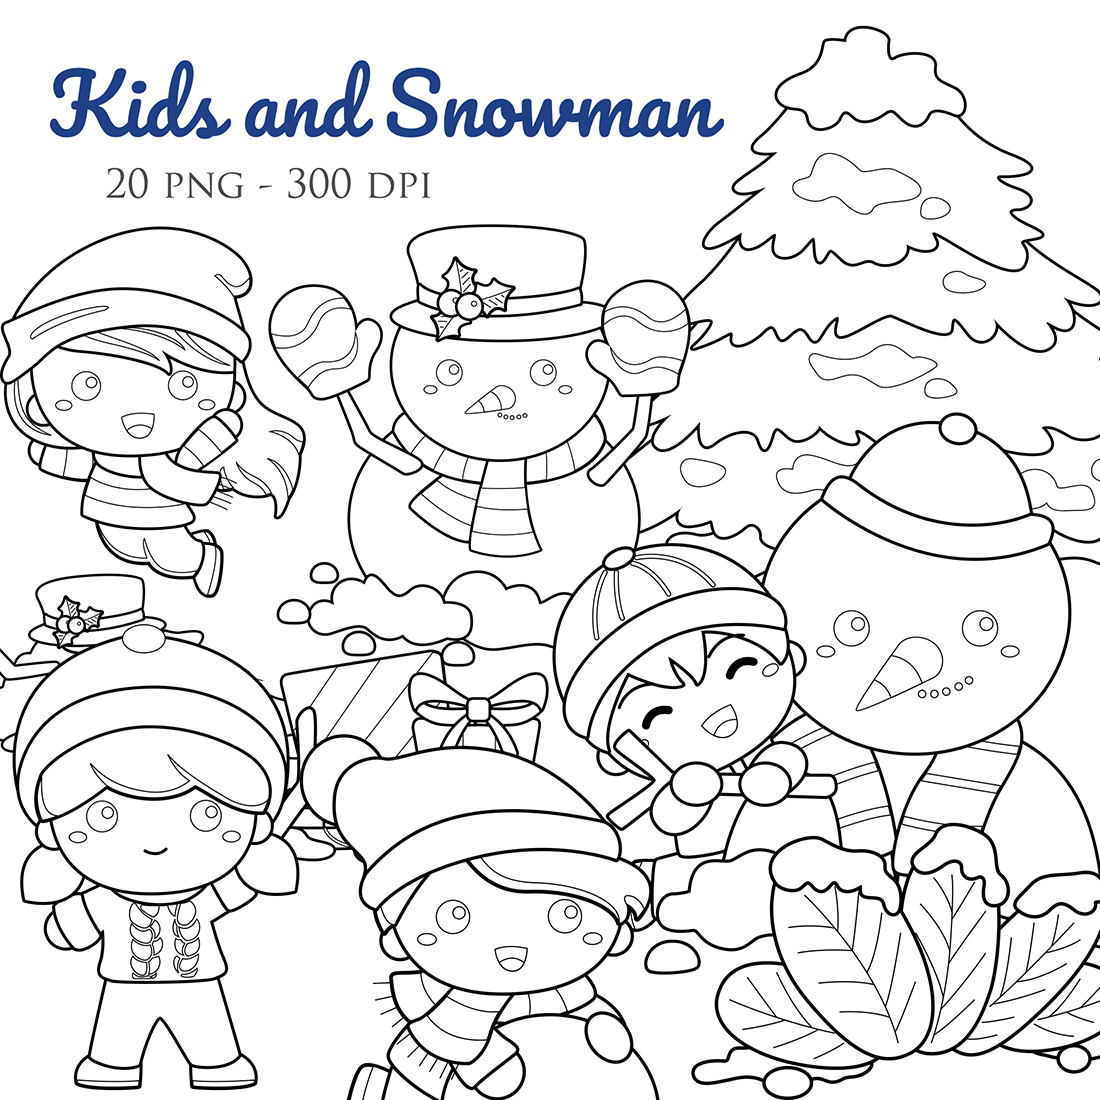 Happy Kids and Snowman Christmas Holiday Celebrate Cartoon Digital Stamp Outline Black and White cover image.